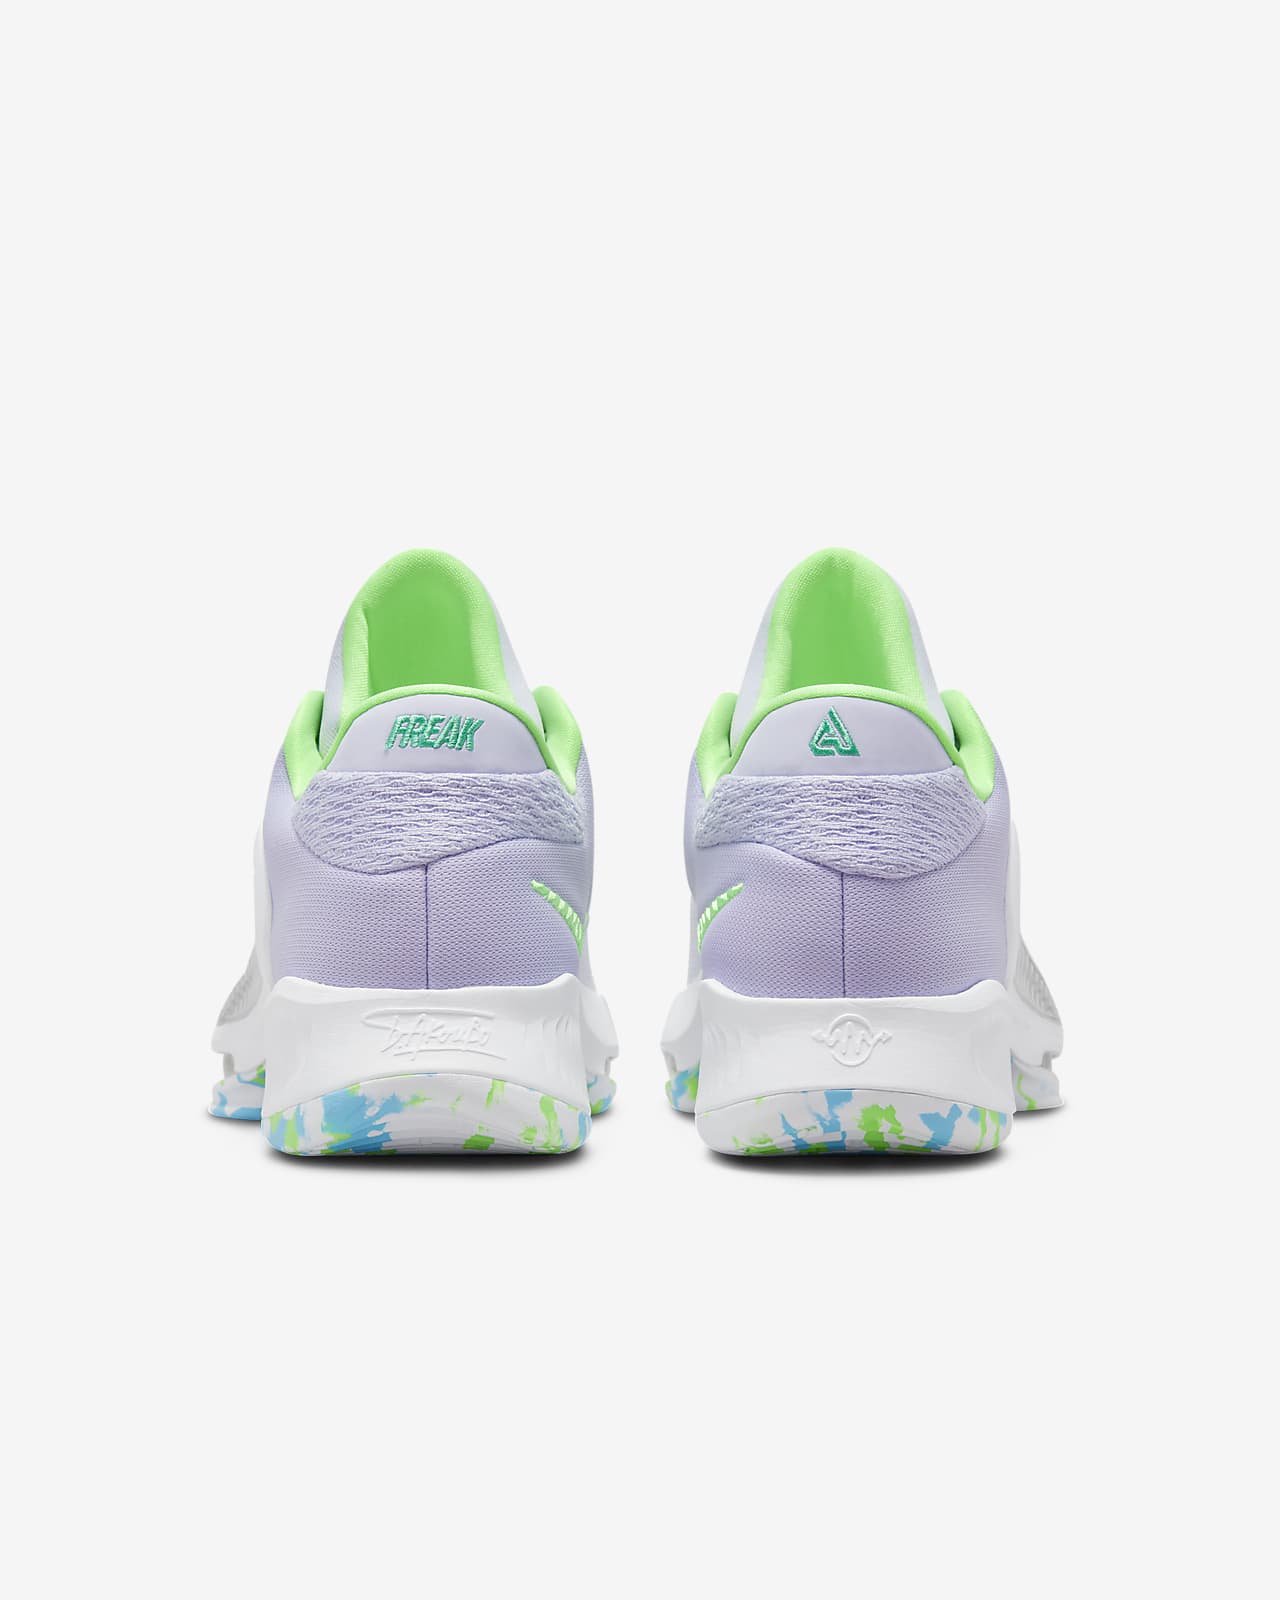 The Nike Air Force 1 Gets Mean in Purple and Green - Sneaker Freaker